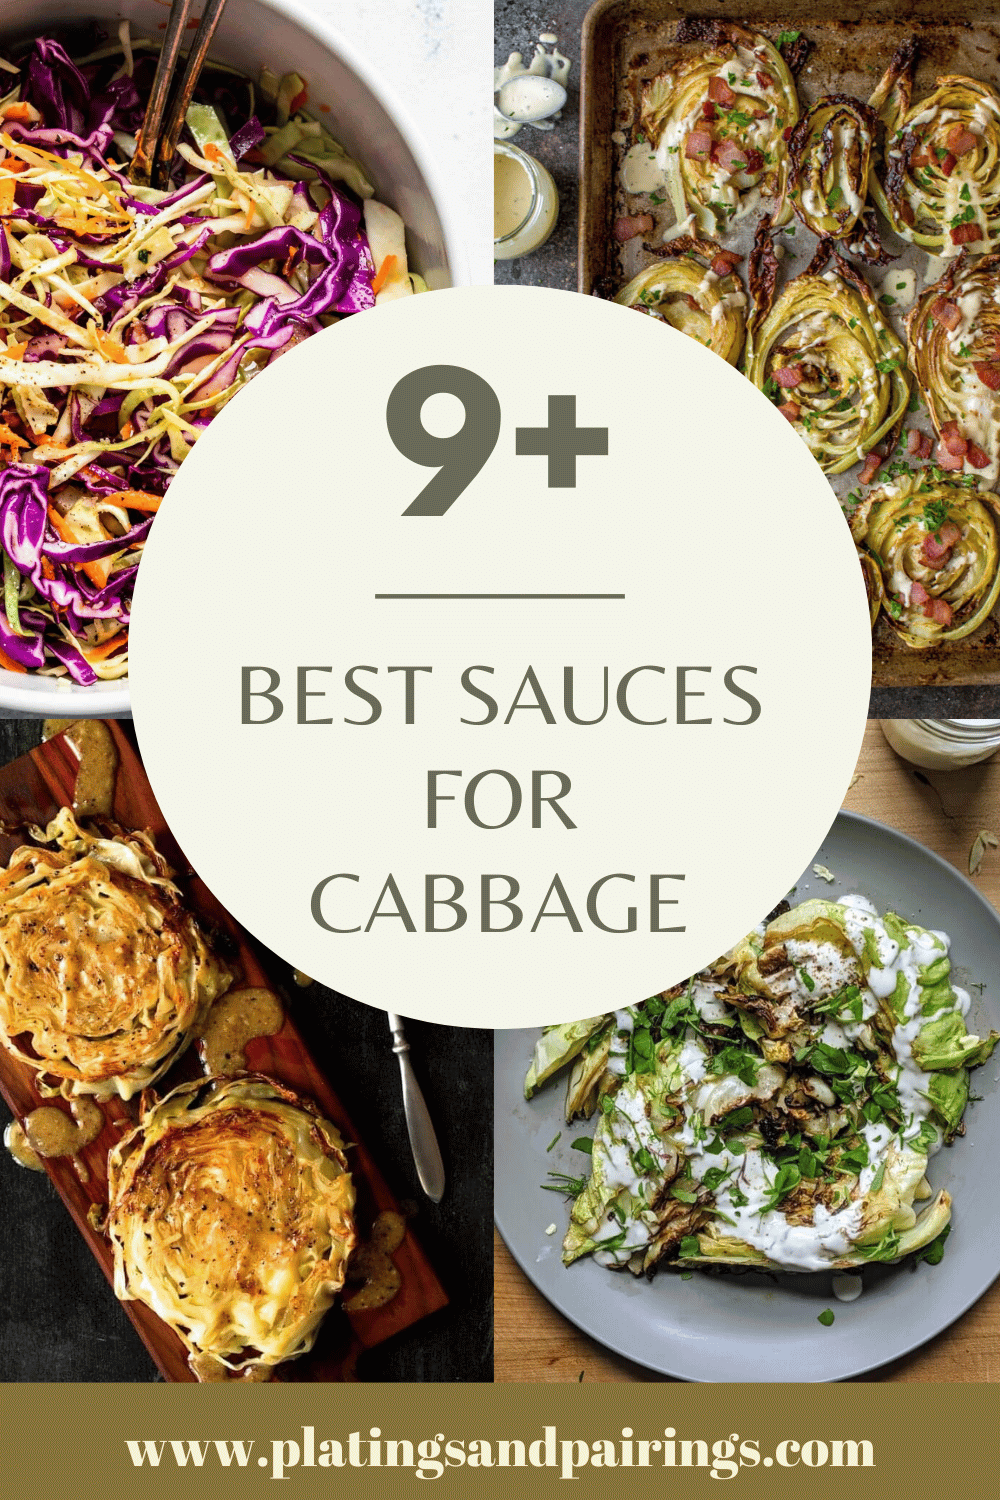 Collage of sauces for cabbage with text overlay.